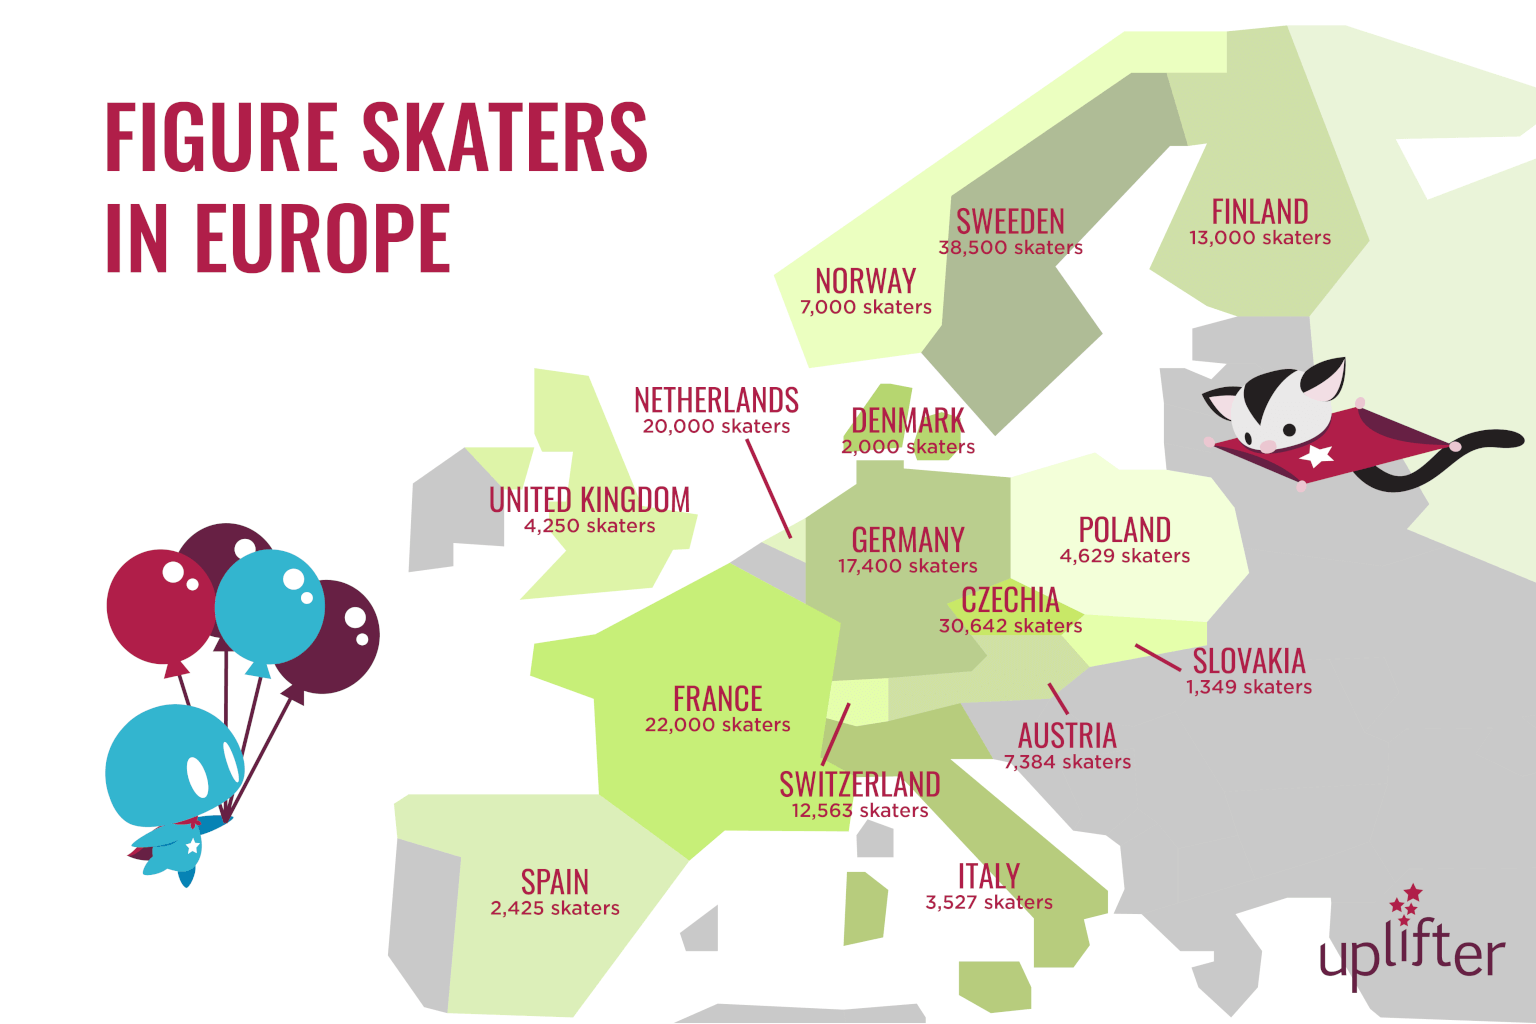 Total number of figure skaters in Europe. Including official data and estimates based on figure skating club or ice rink data. 